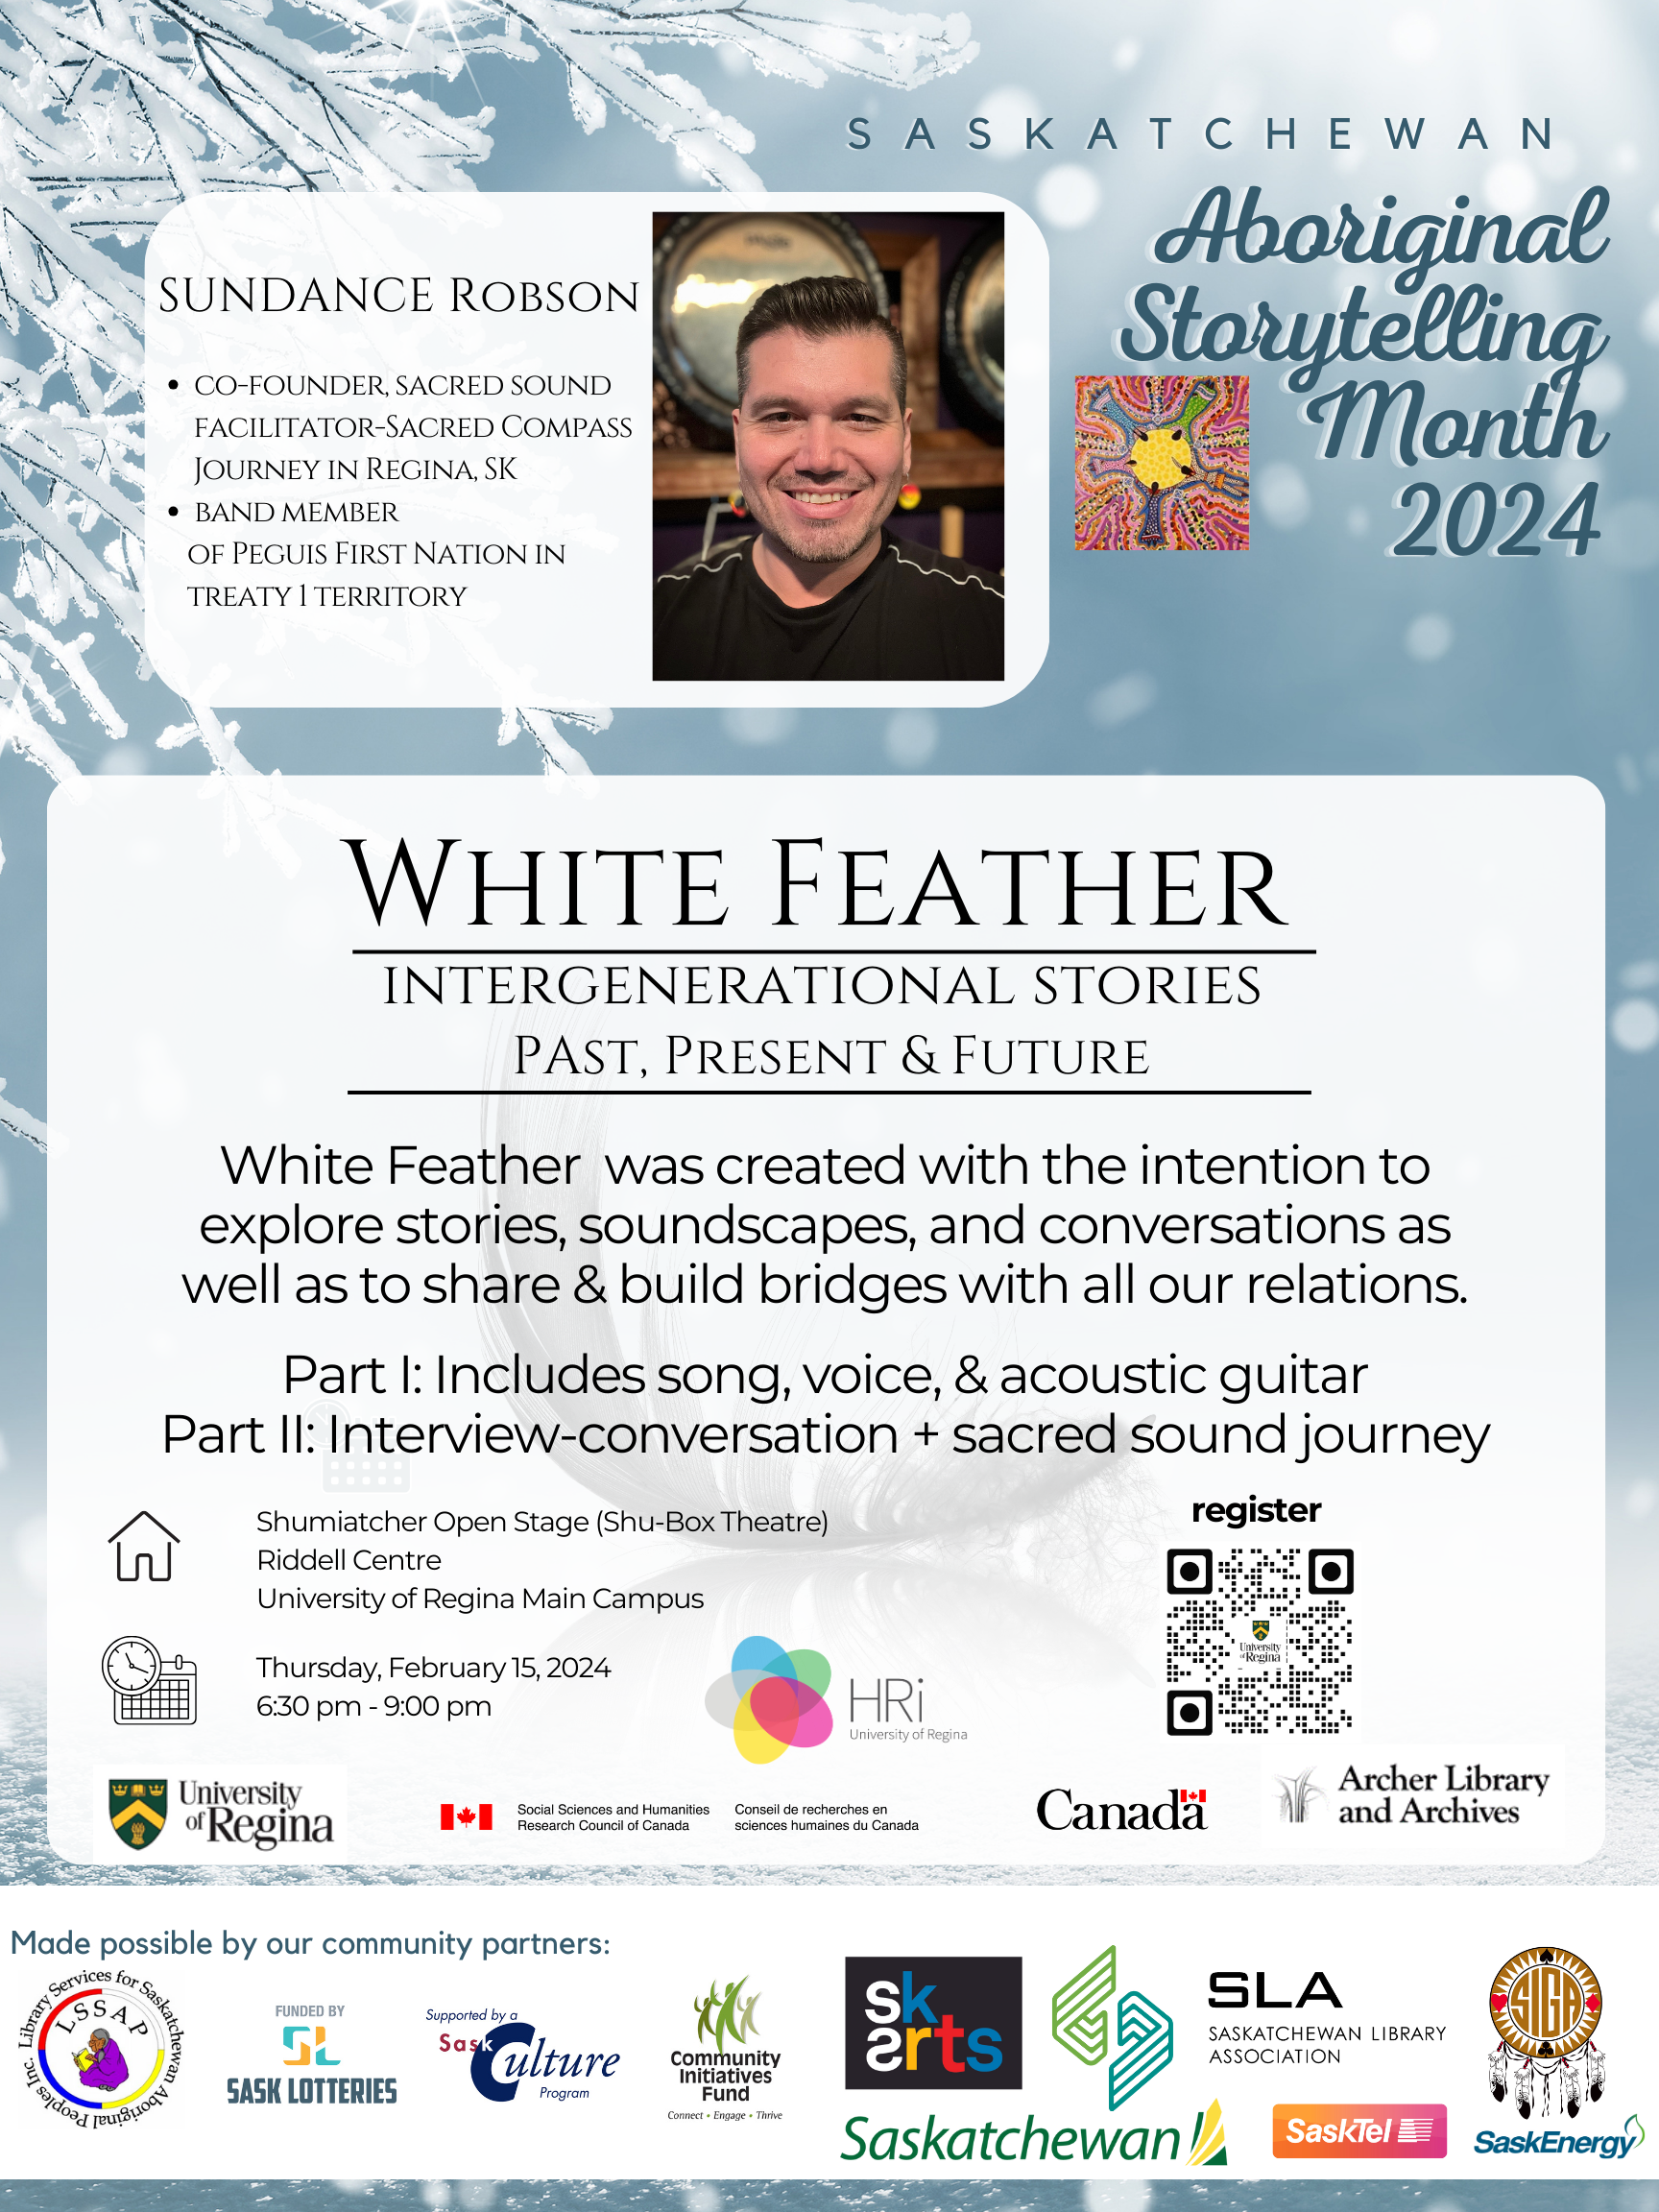 White Feather: Intergenerational Stories Past, Present & Future